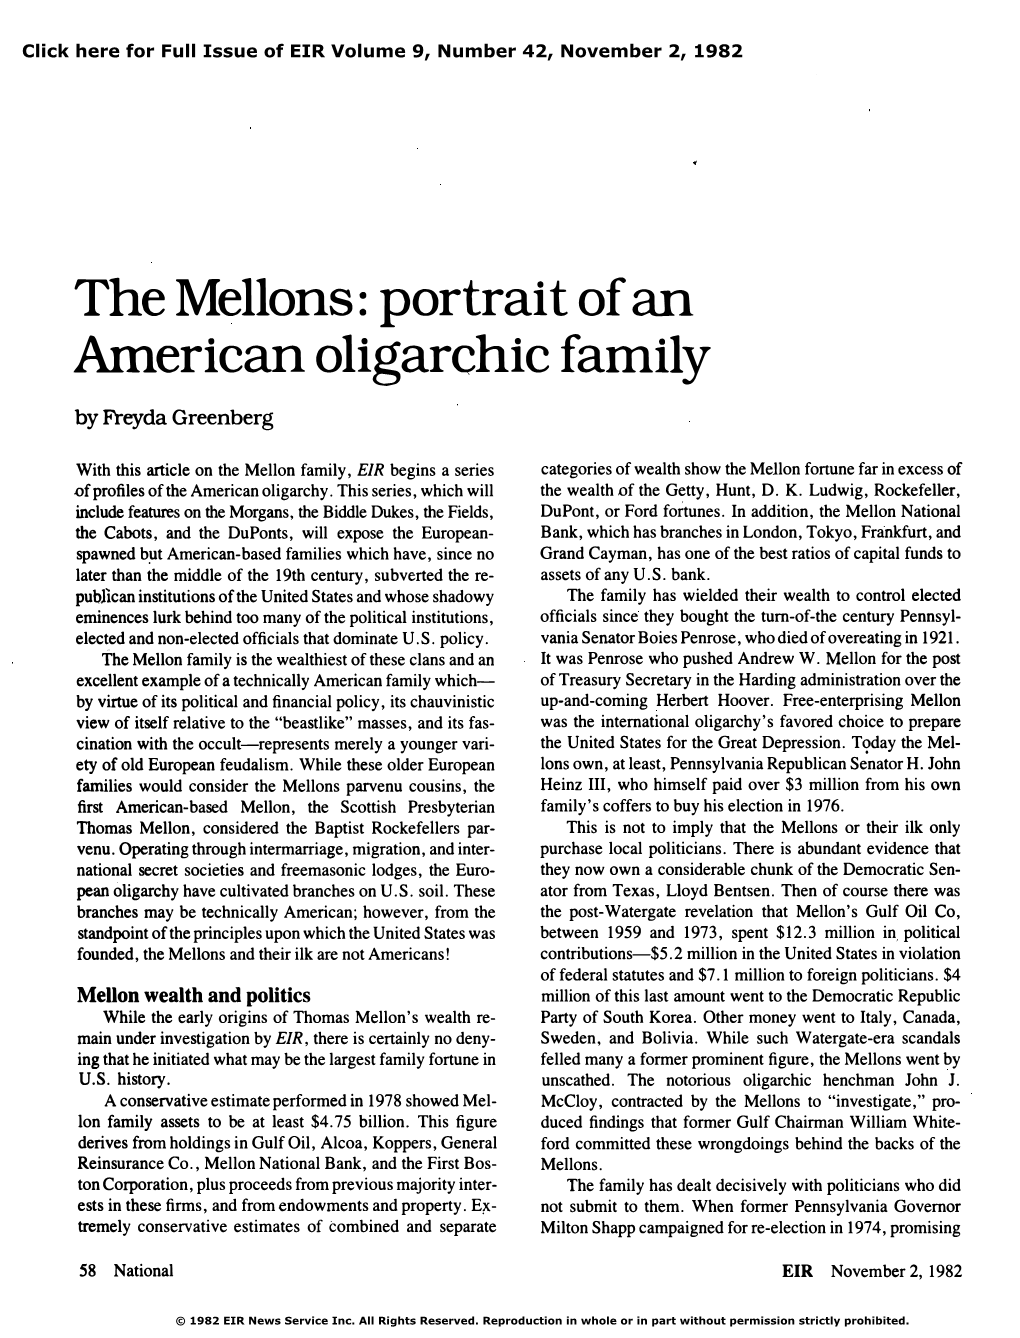 The Mellons: Portrait of an American Oligarchic Family